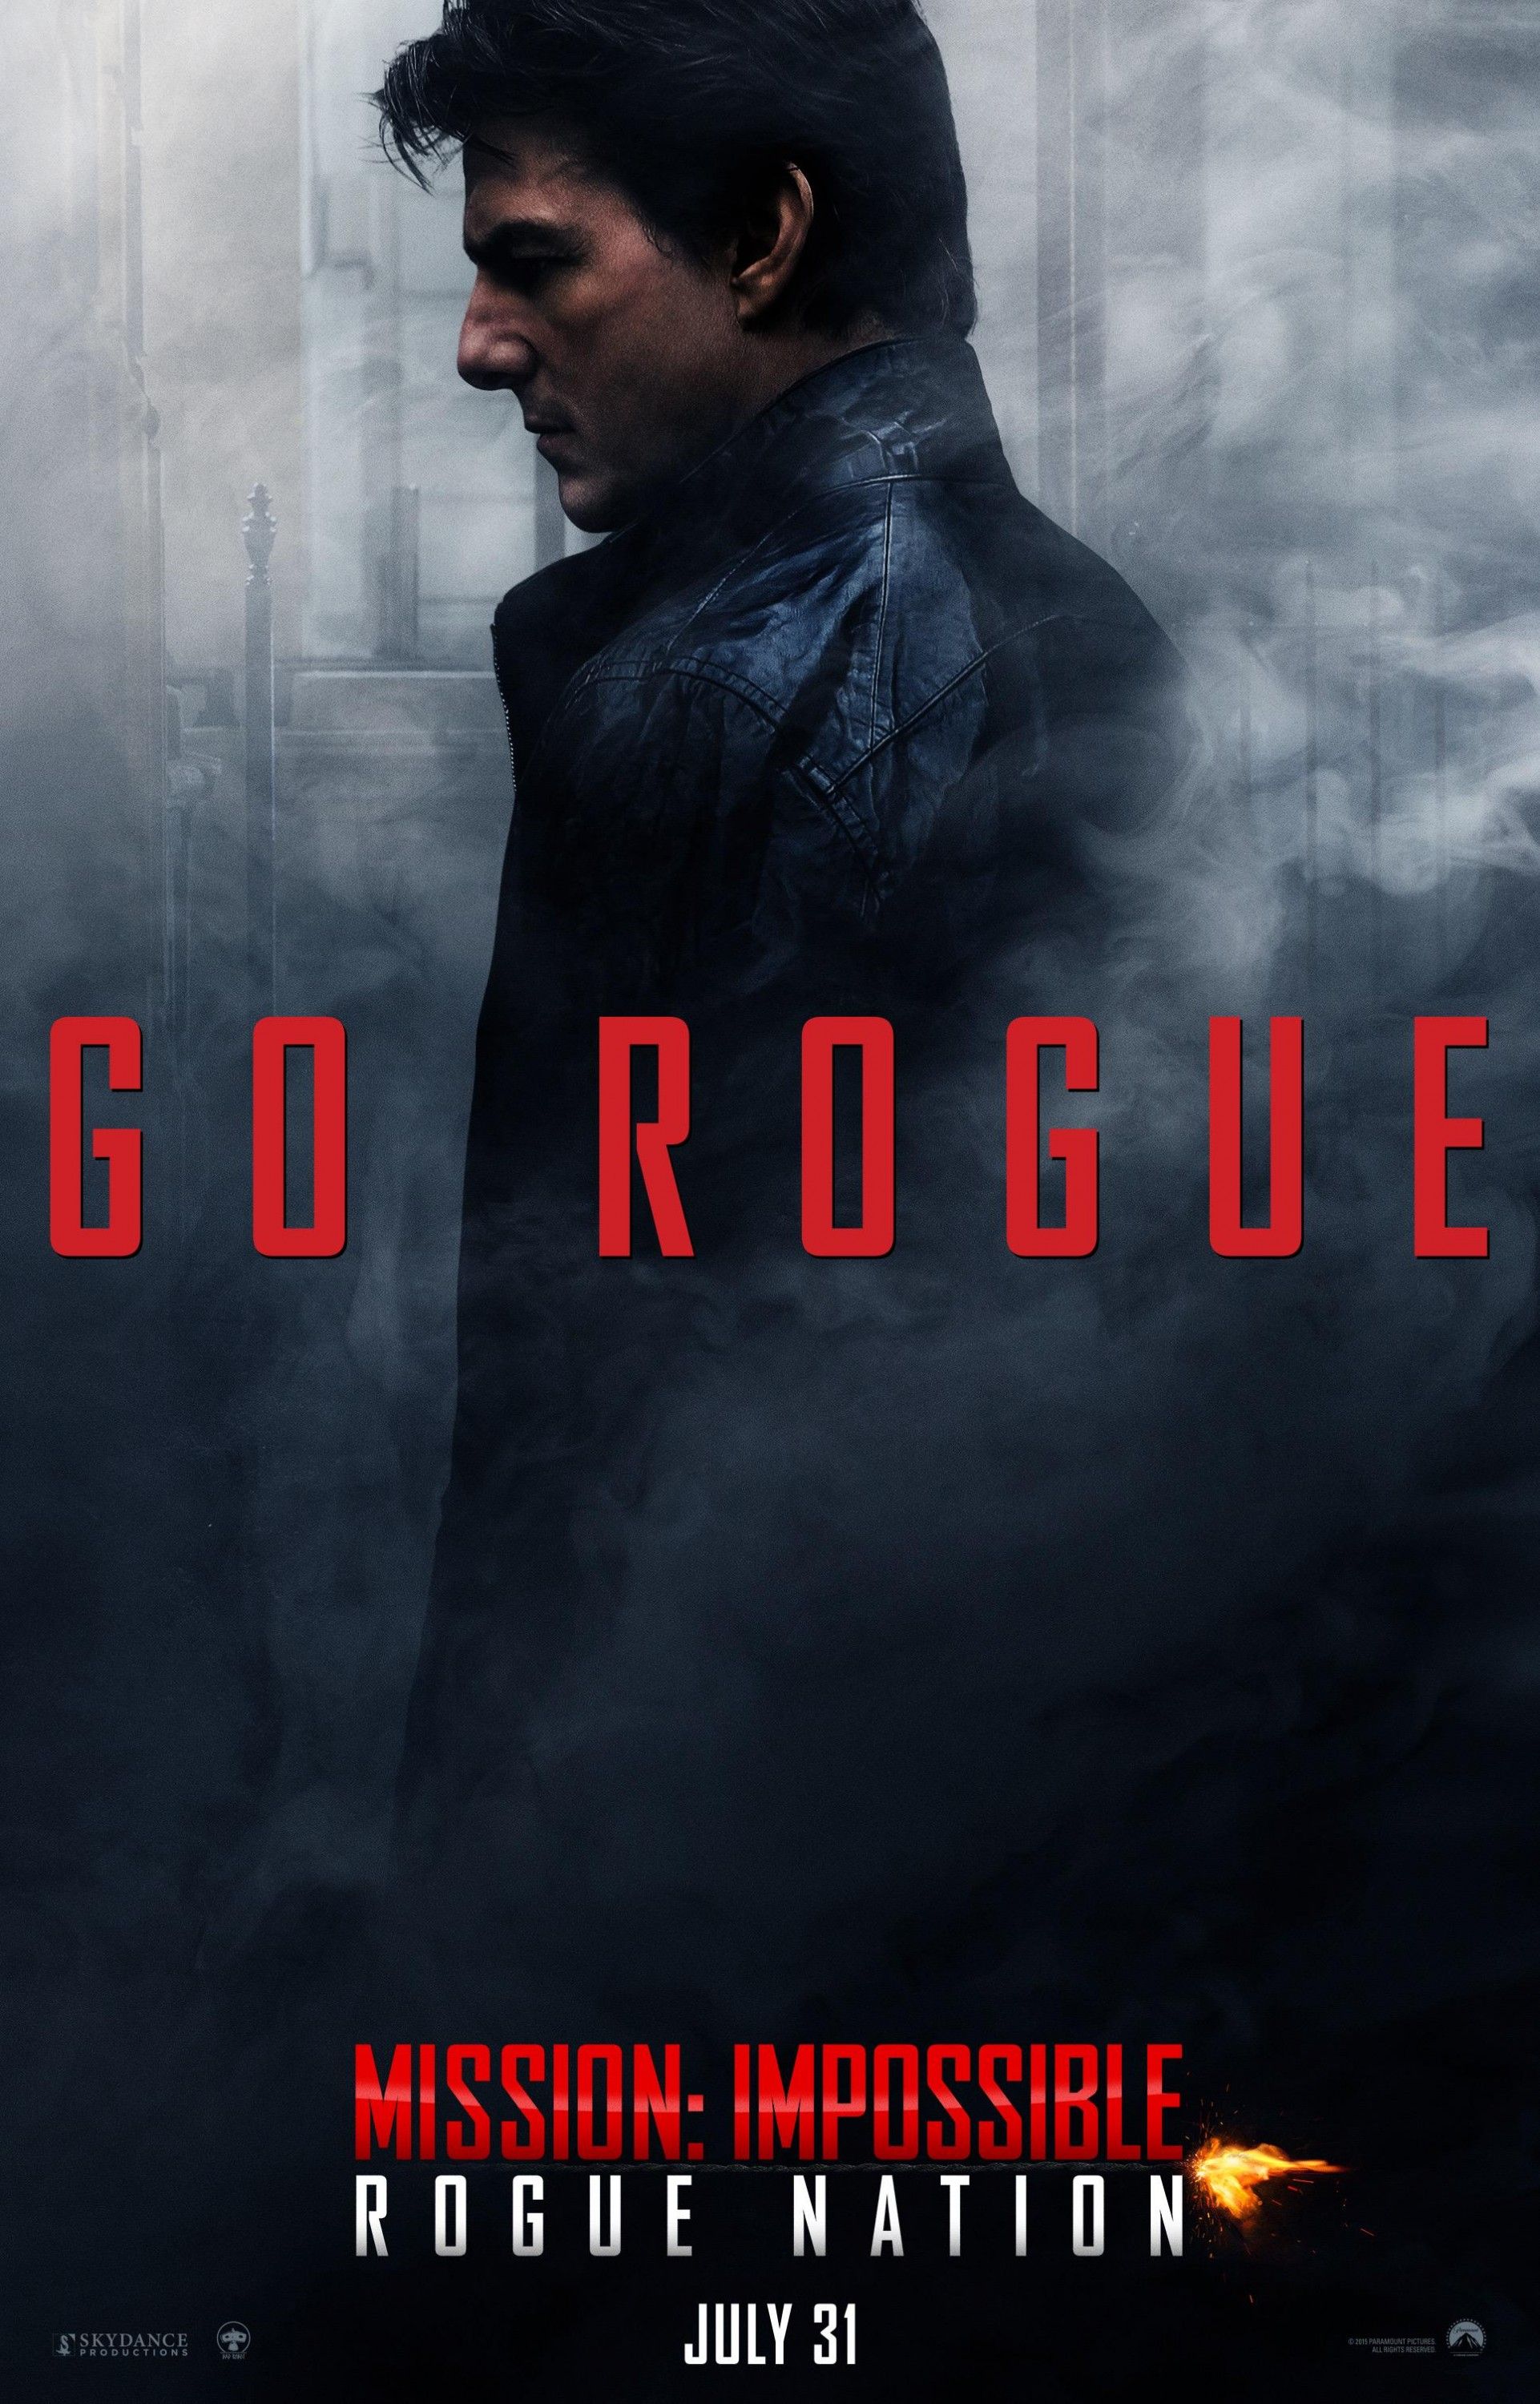 Mission: Impossible Rogue Nation Tom Cruise Poster